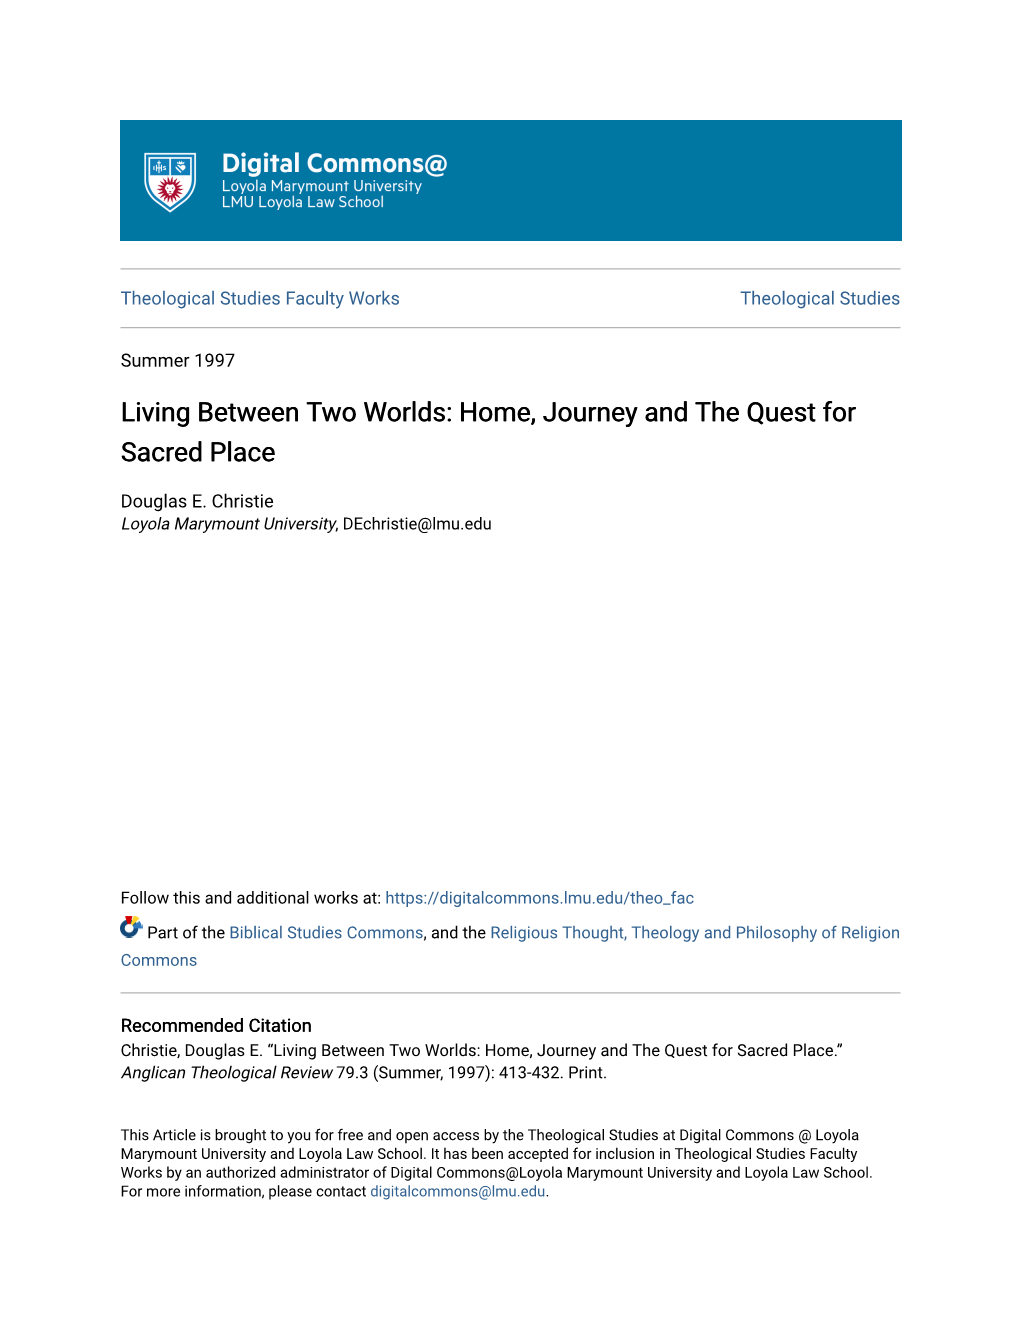 Living Between Two Worlds: Home, Journey and the Quest for Sacred Place